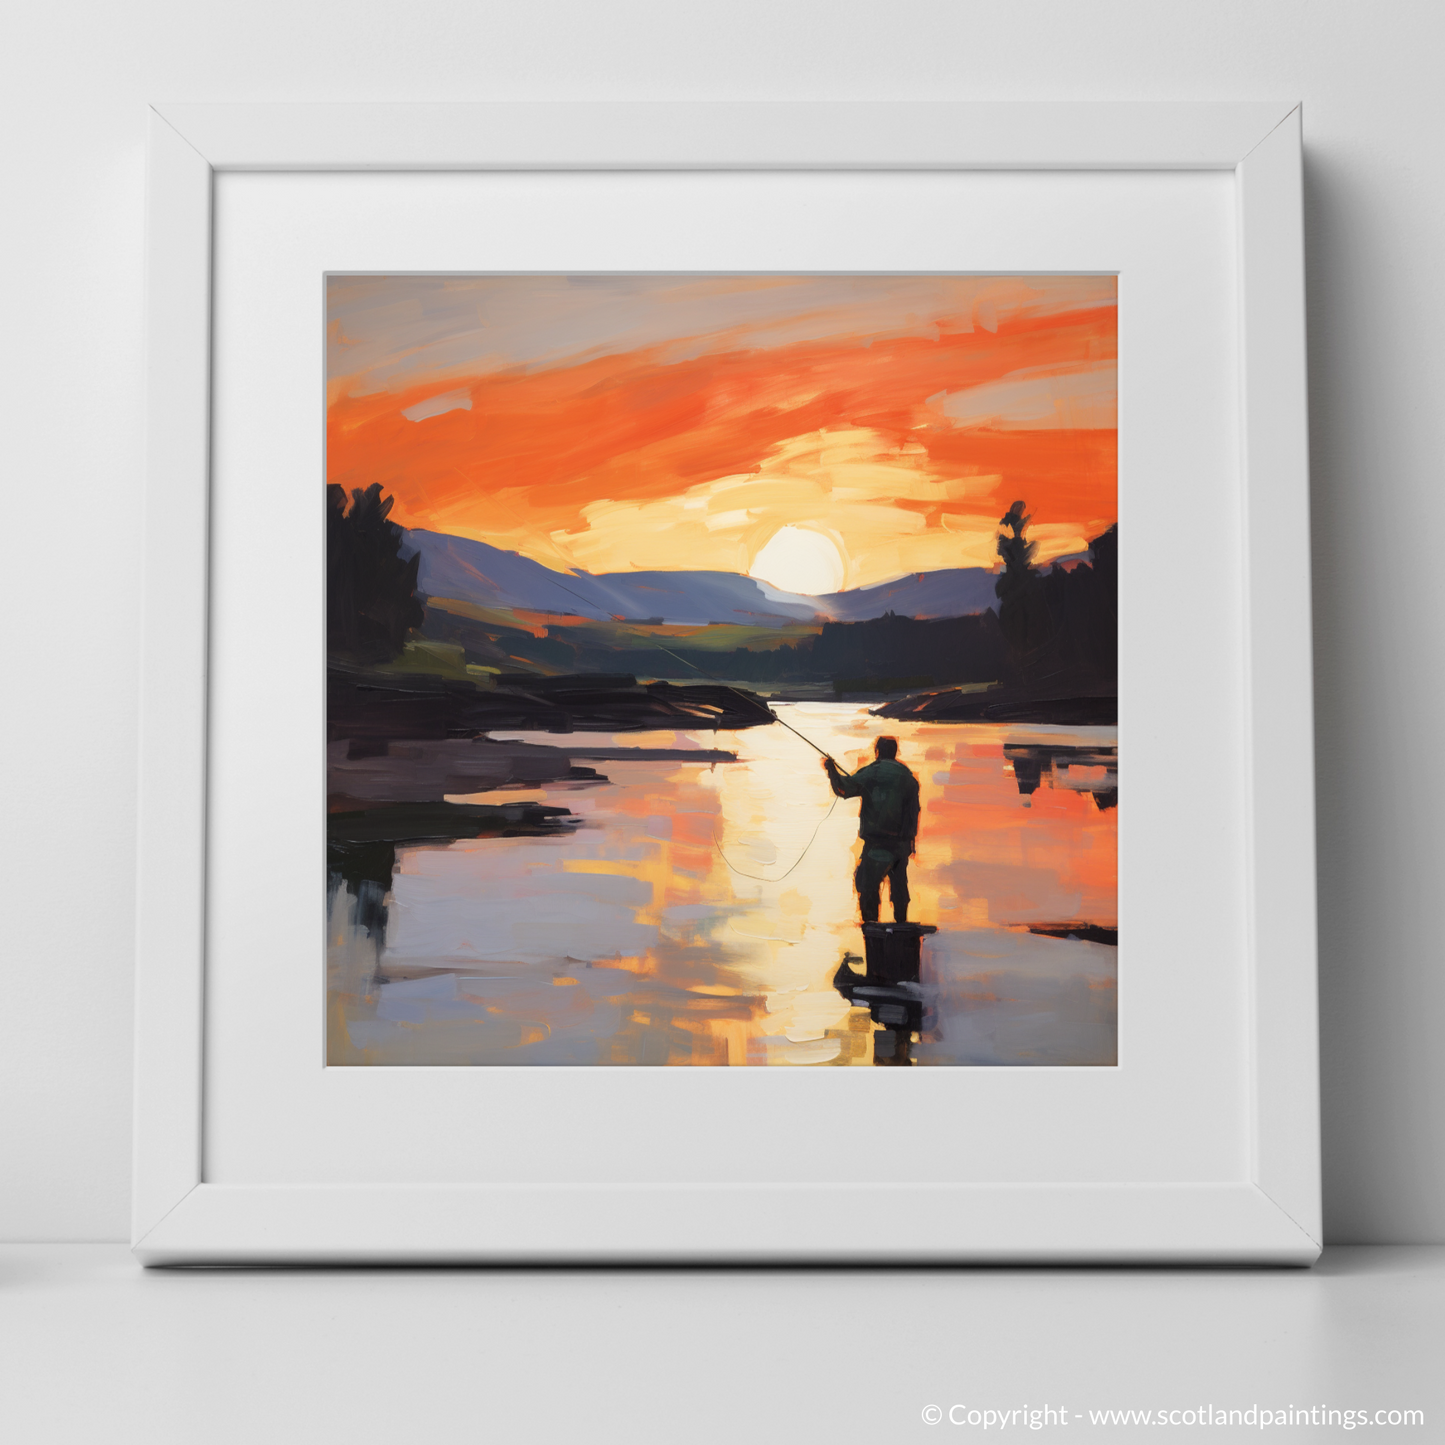 Amber Twilight on the River Nith: A Fly Fishing Soliloquy